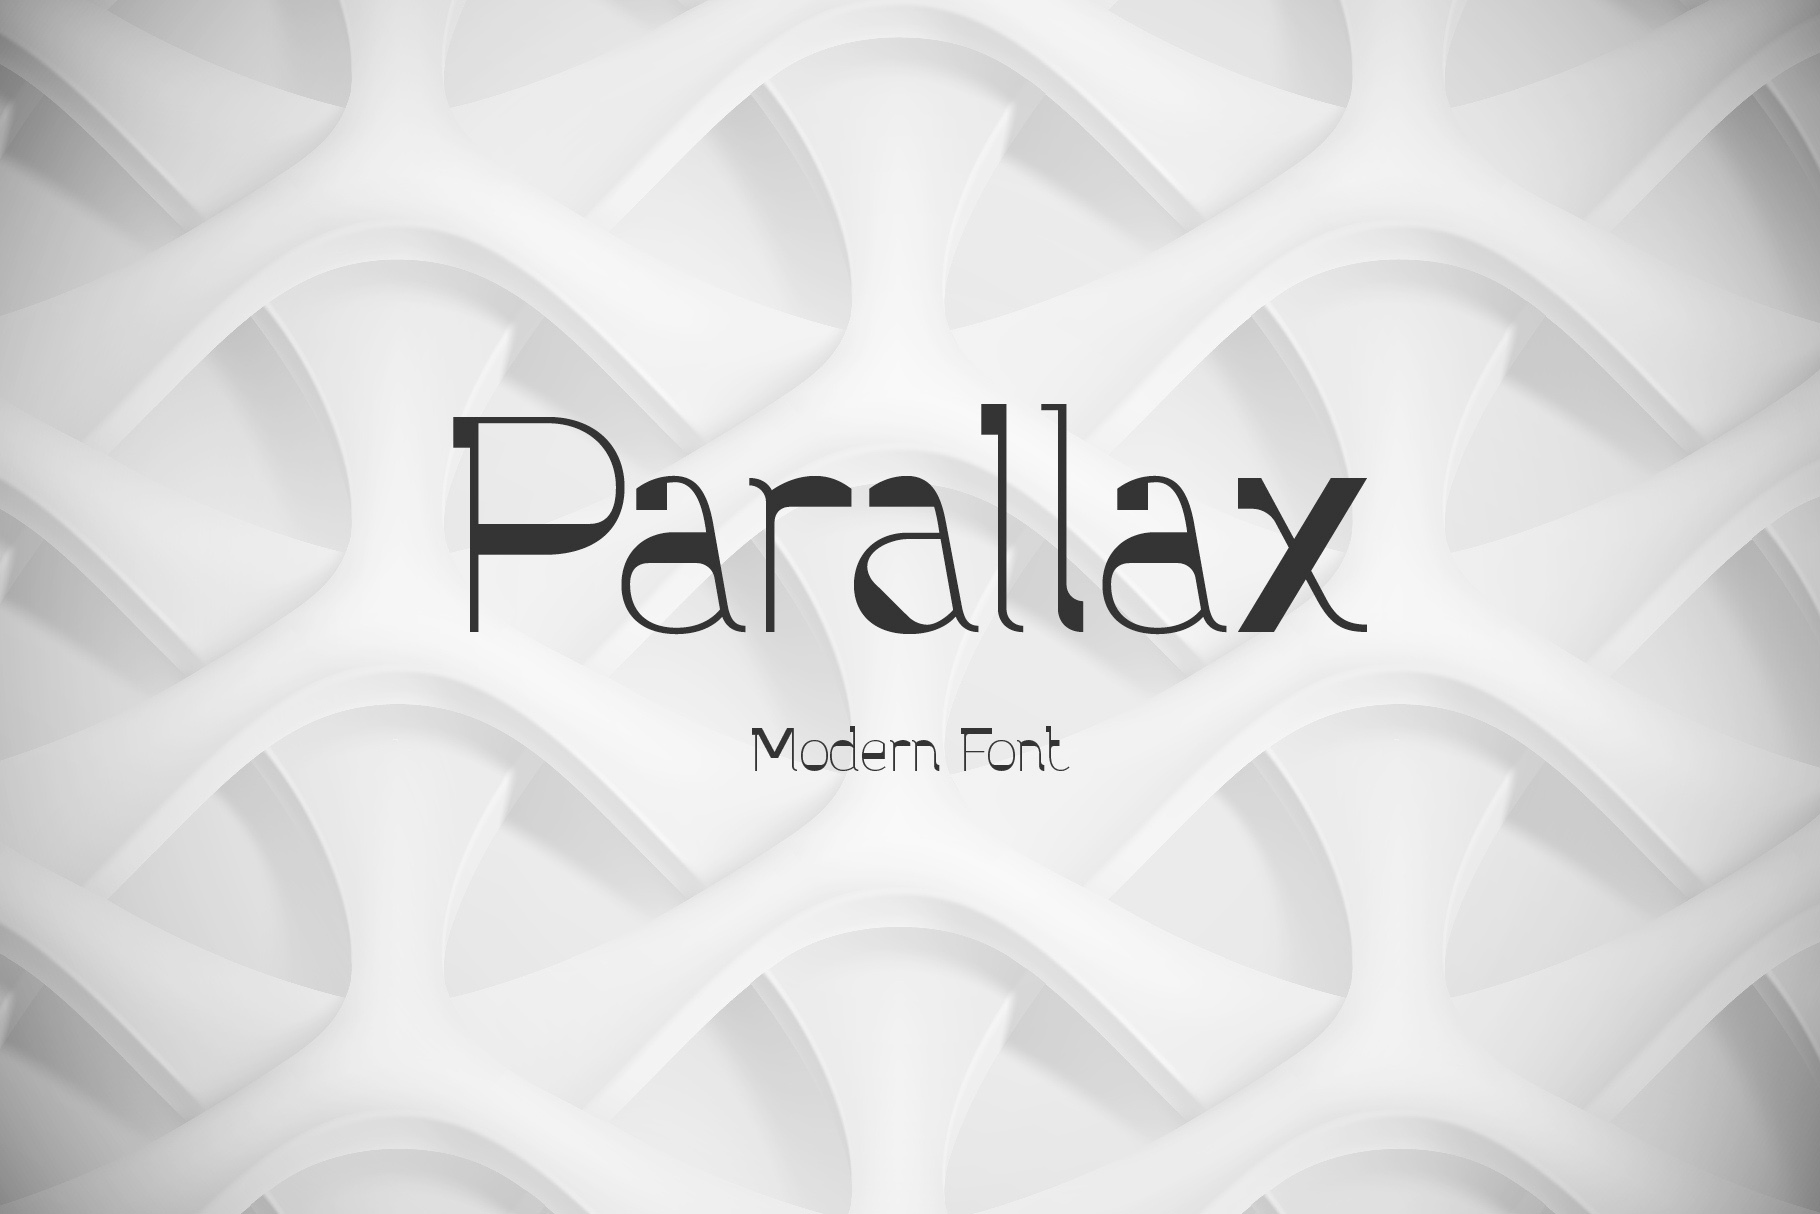 Parallax Font and Graphics facebook image.